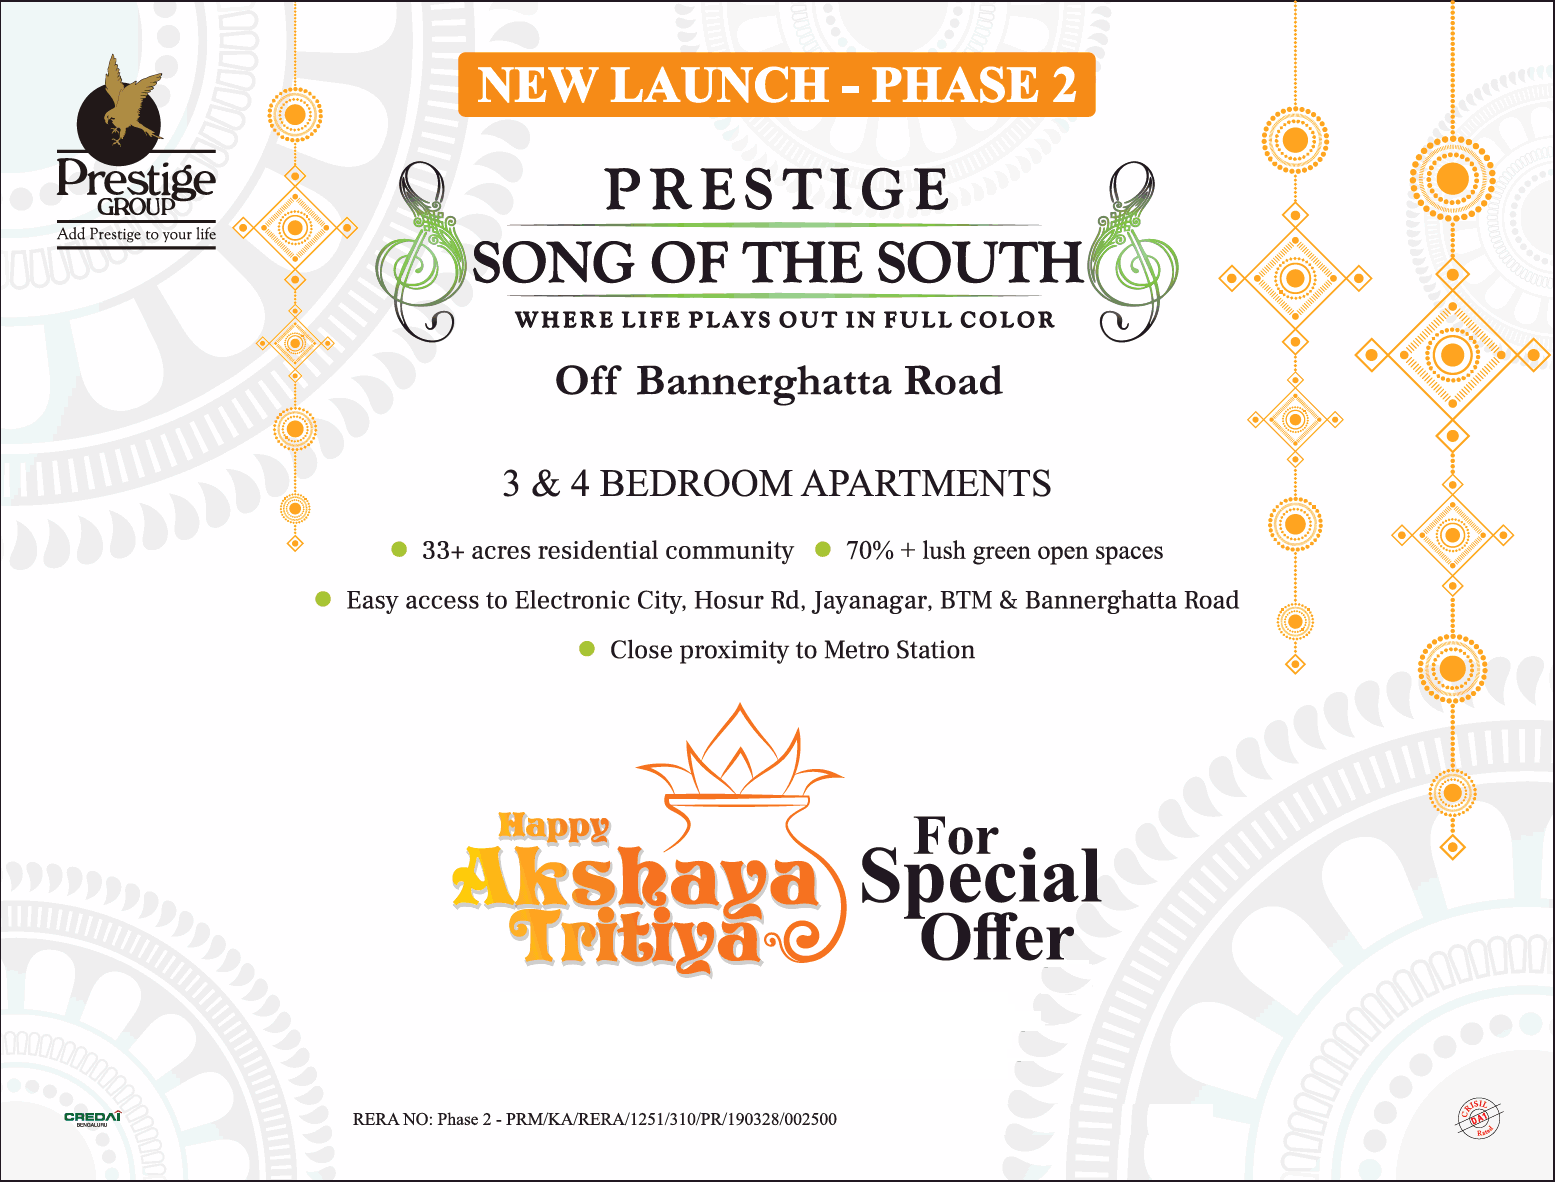 Prestige Song of the South presents 3 & 4 Bedroom Apartments in Bangalore Update